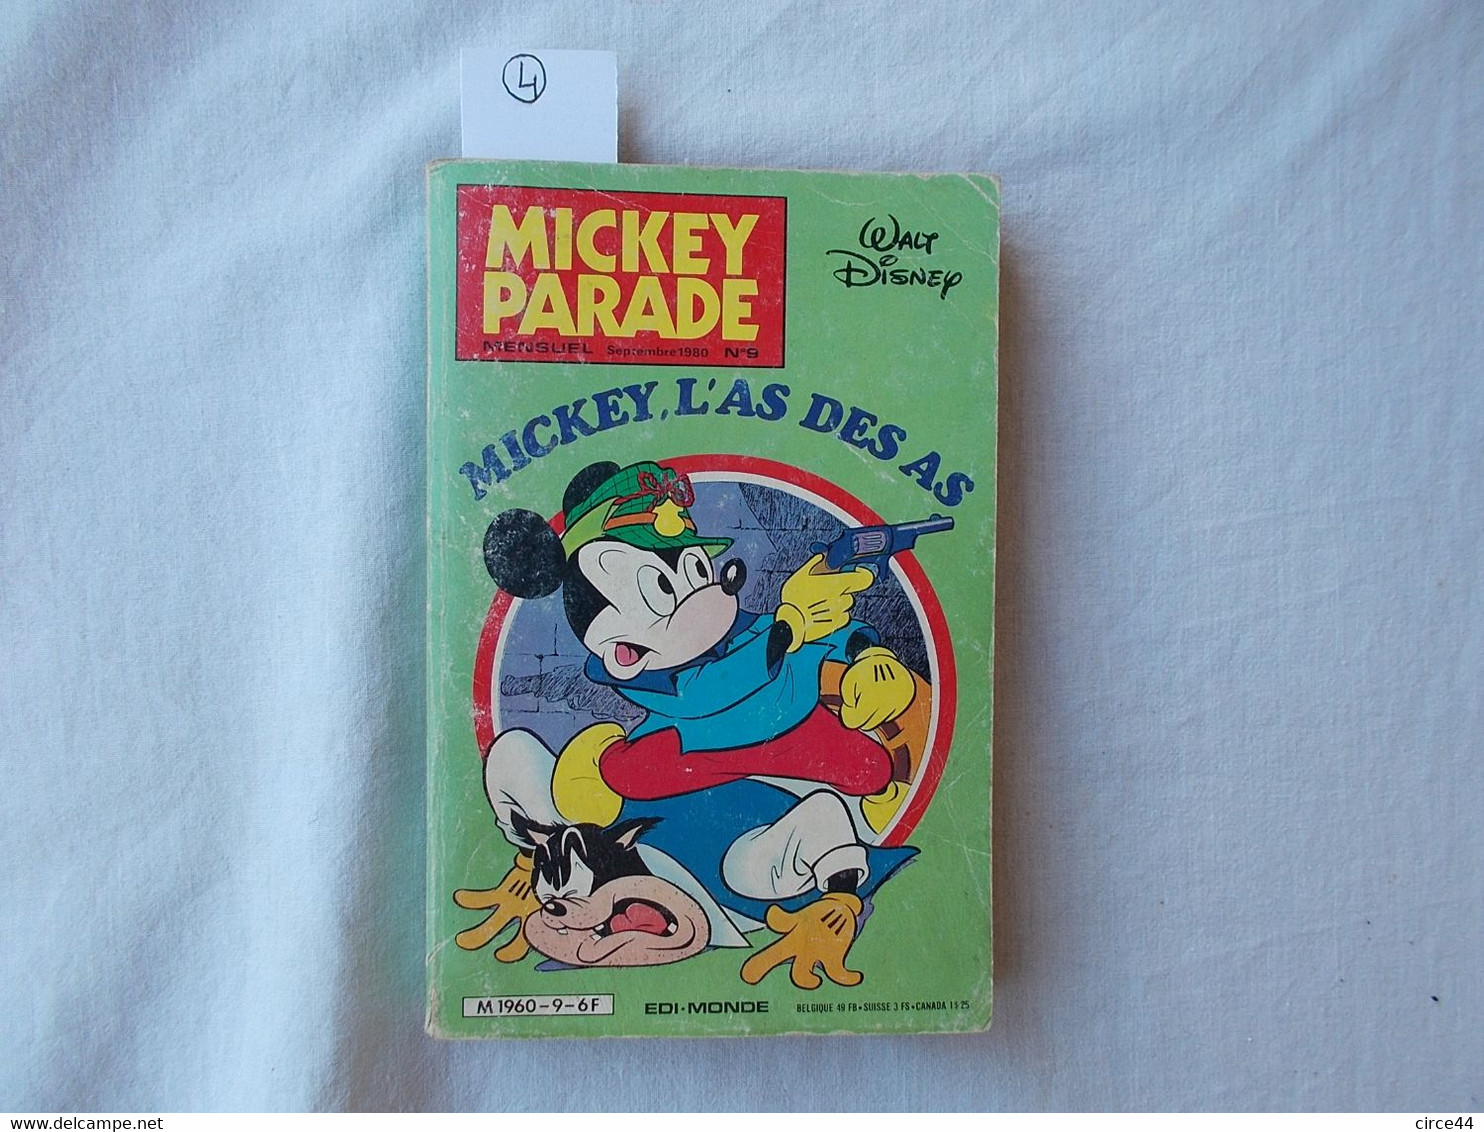 JOURNAL DE MICKEY.WALT DISNEY.MICKEY PARADE.288 PAGES.ANNEE 1980..MICKEYL'AS DES AS.AVIATION - Mickey Parade